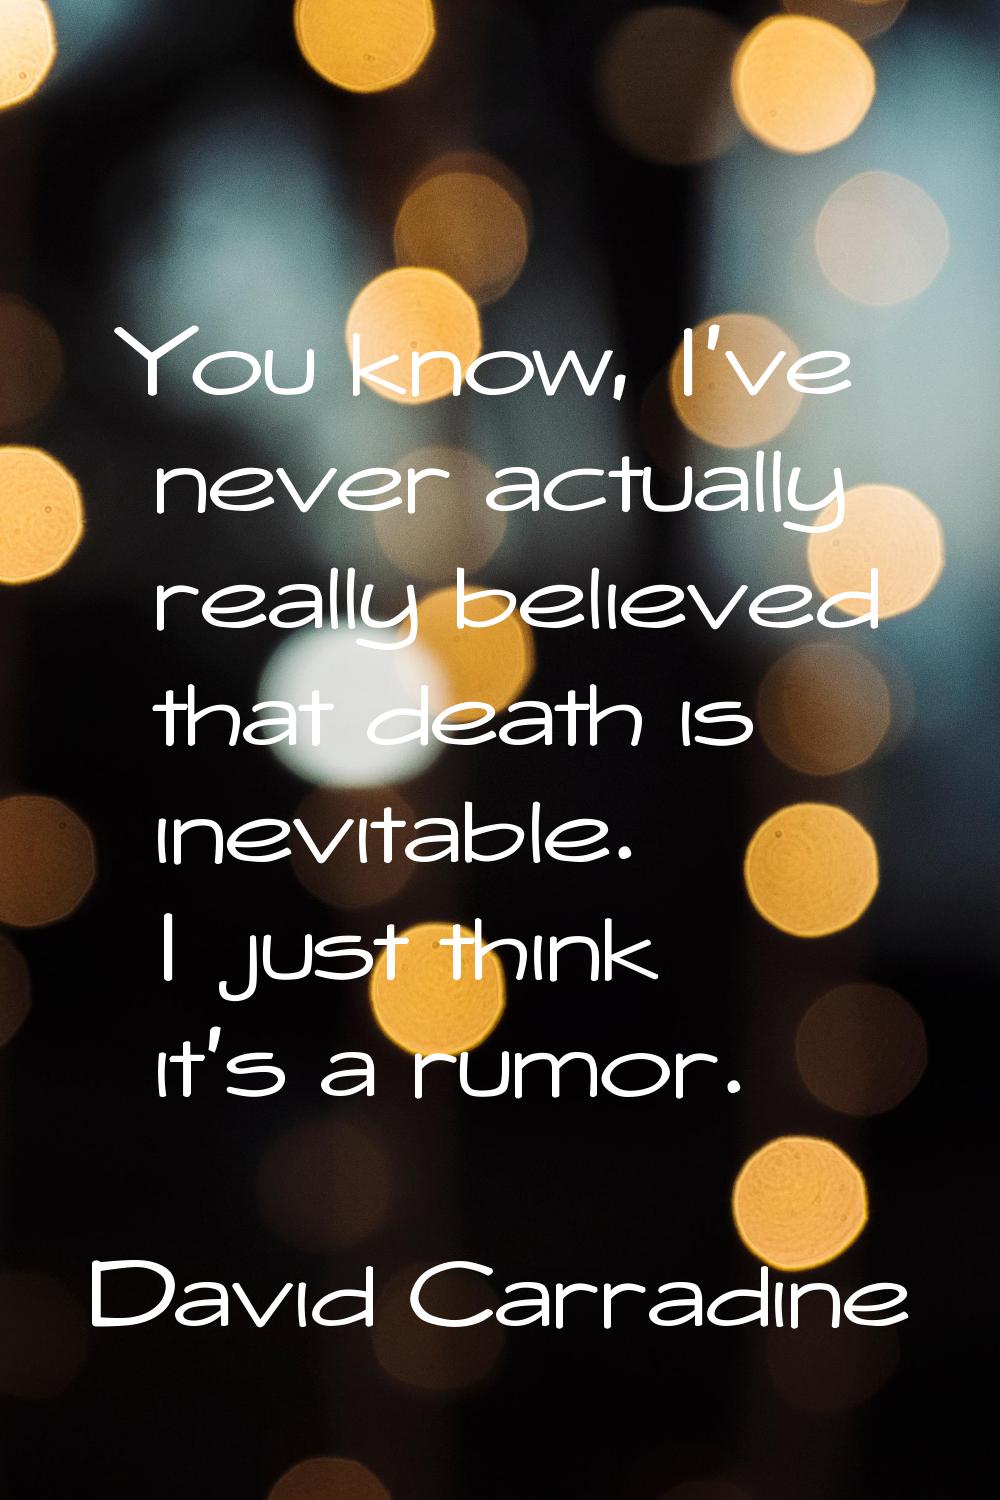 You know, I've never actually really believed that death is inevitable. I just think it's a rumor.